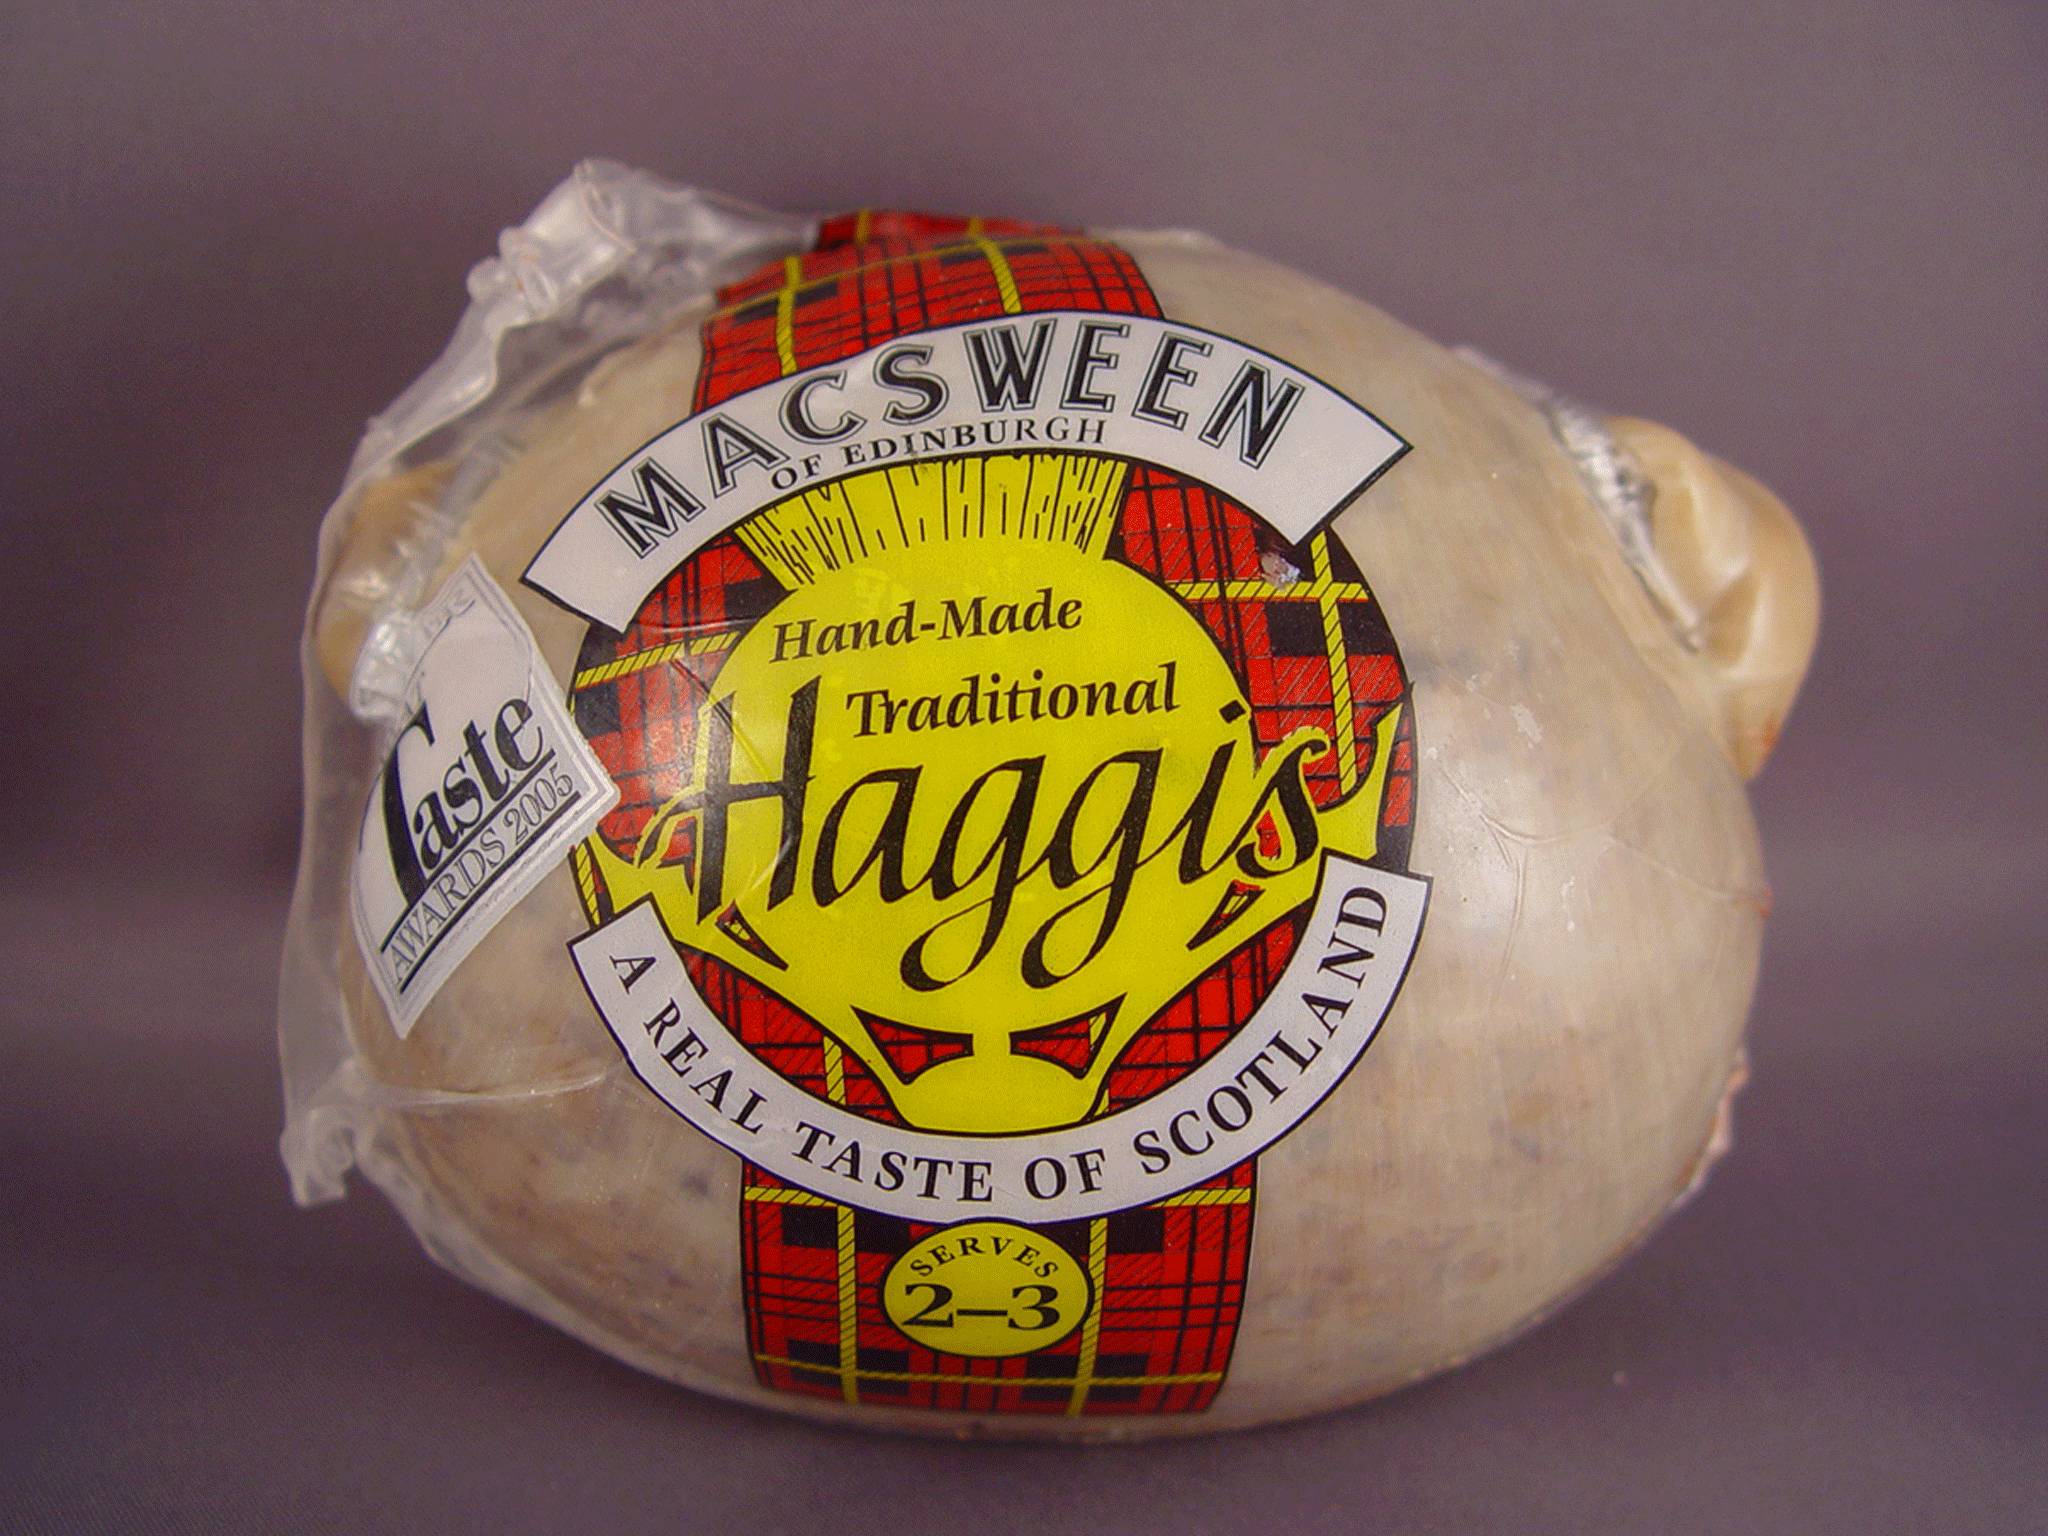 A Macsween's Haggis was to blame for the disturbance